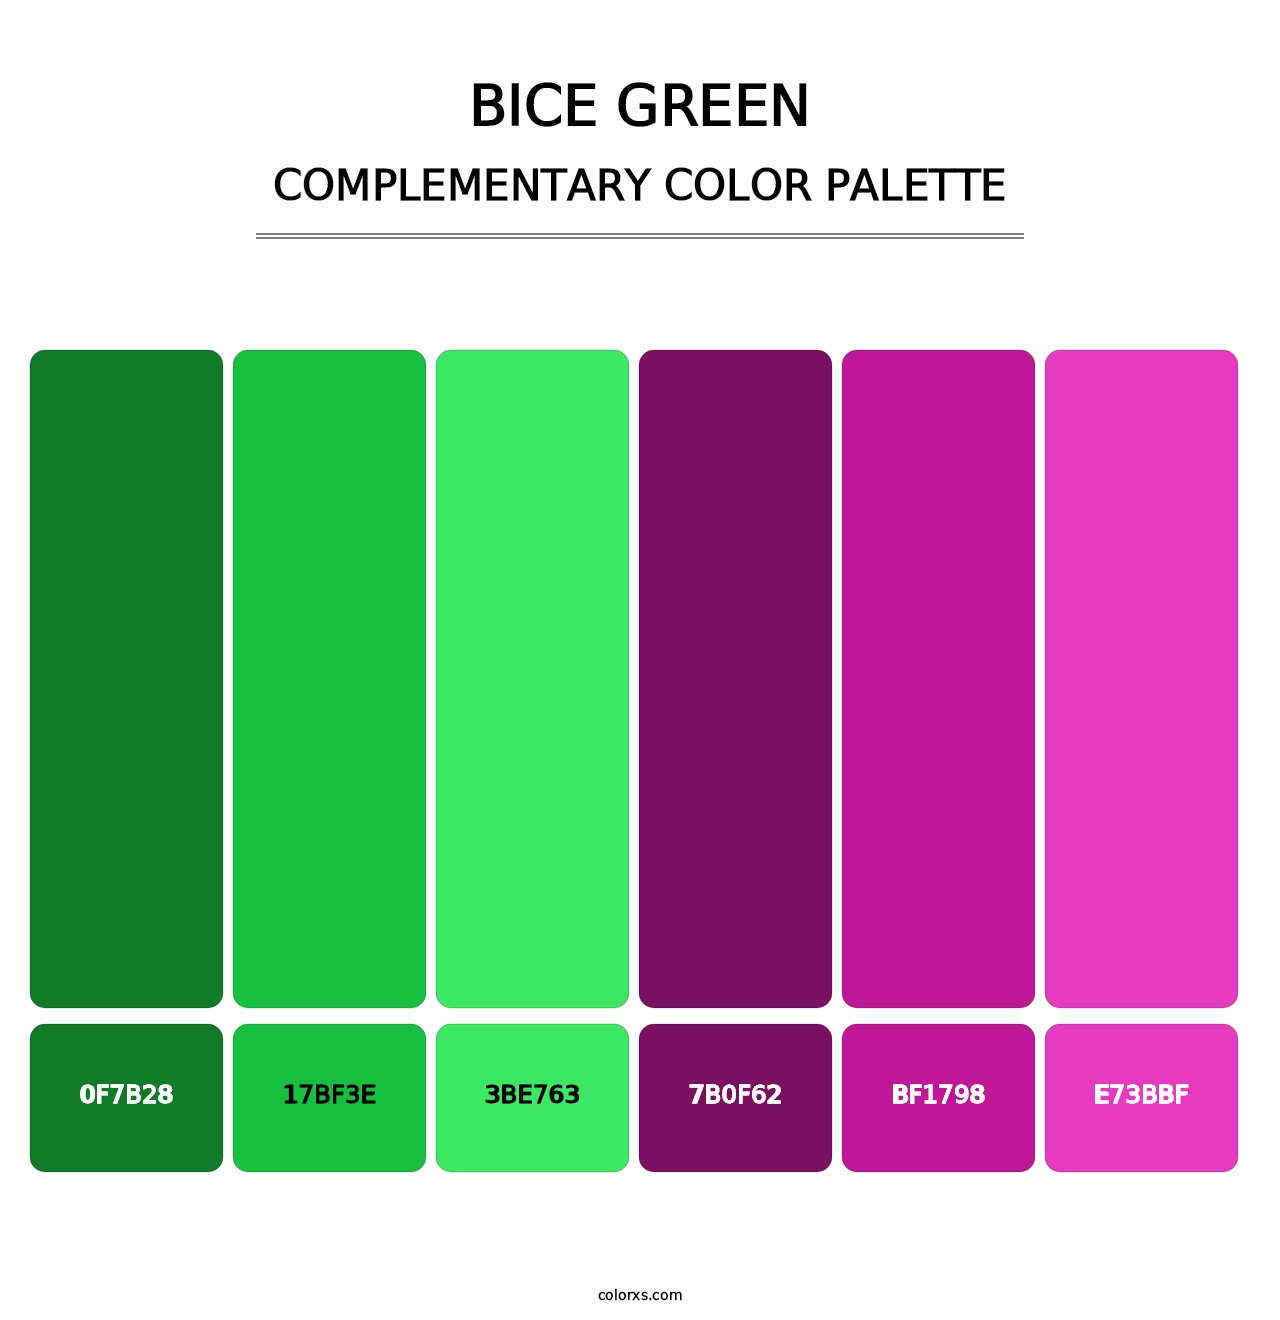 Bice Green - Complementary Color Palette